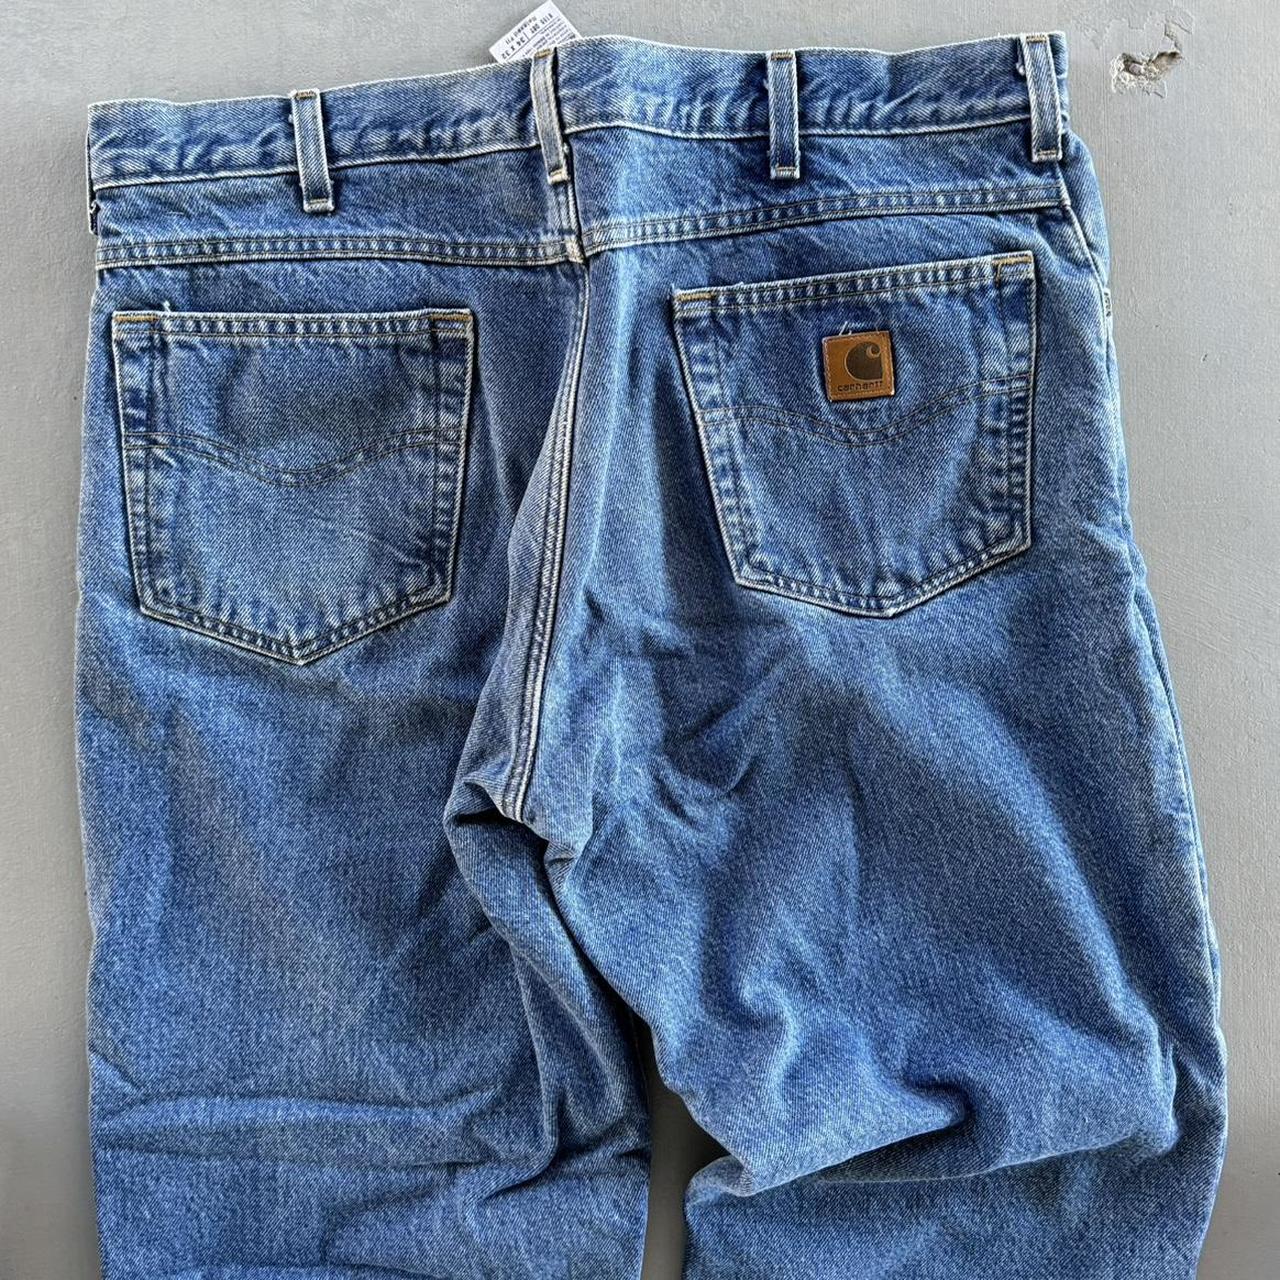 Blanket Lined Carhartt Jeans 🔥🔥🔥 🚩NO PAYPAL🚩you... - Depop